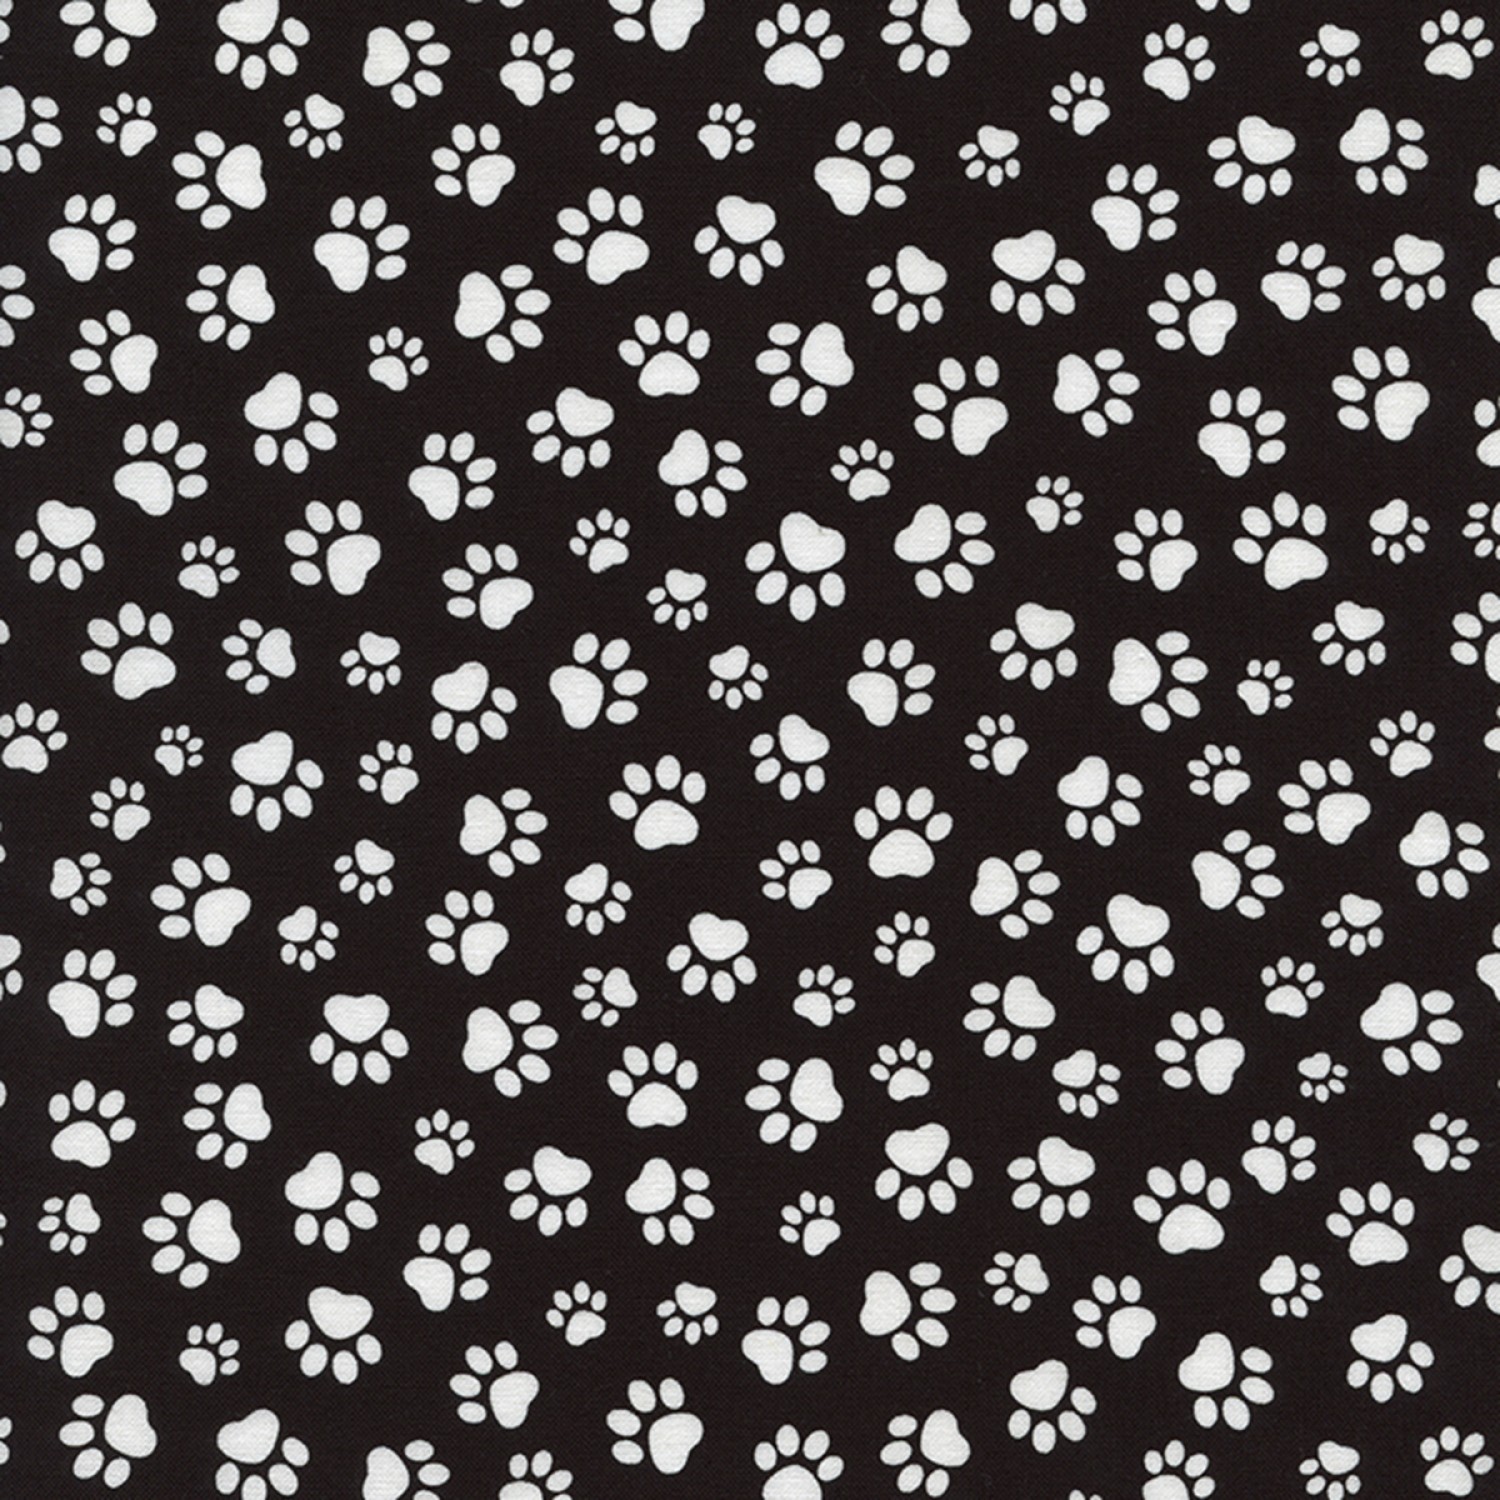 Black and White Paws Fabric